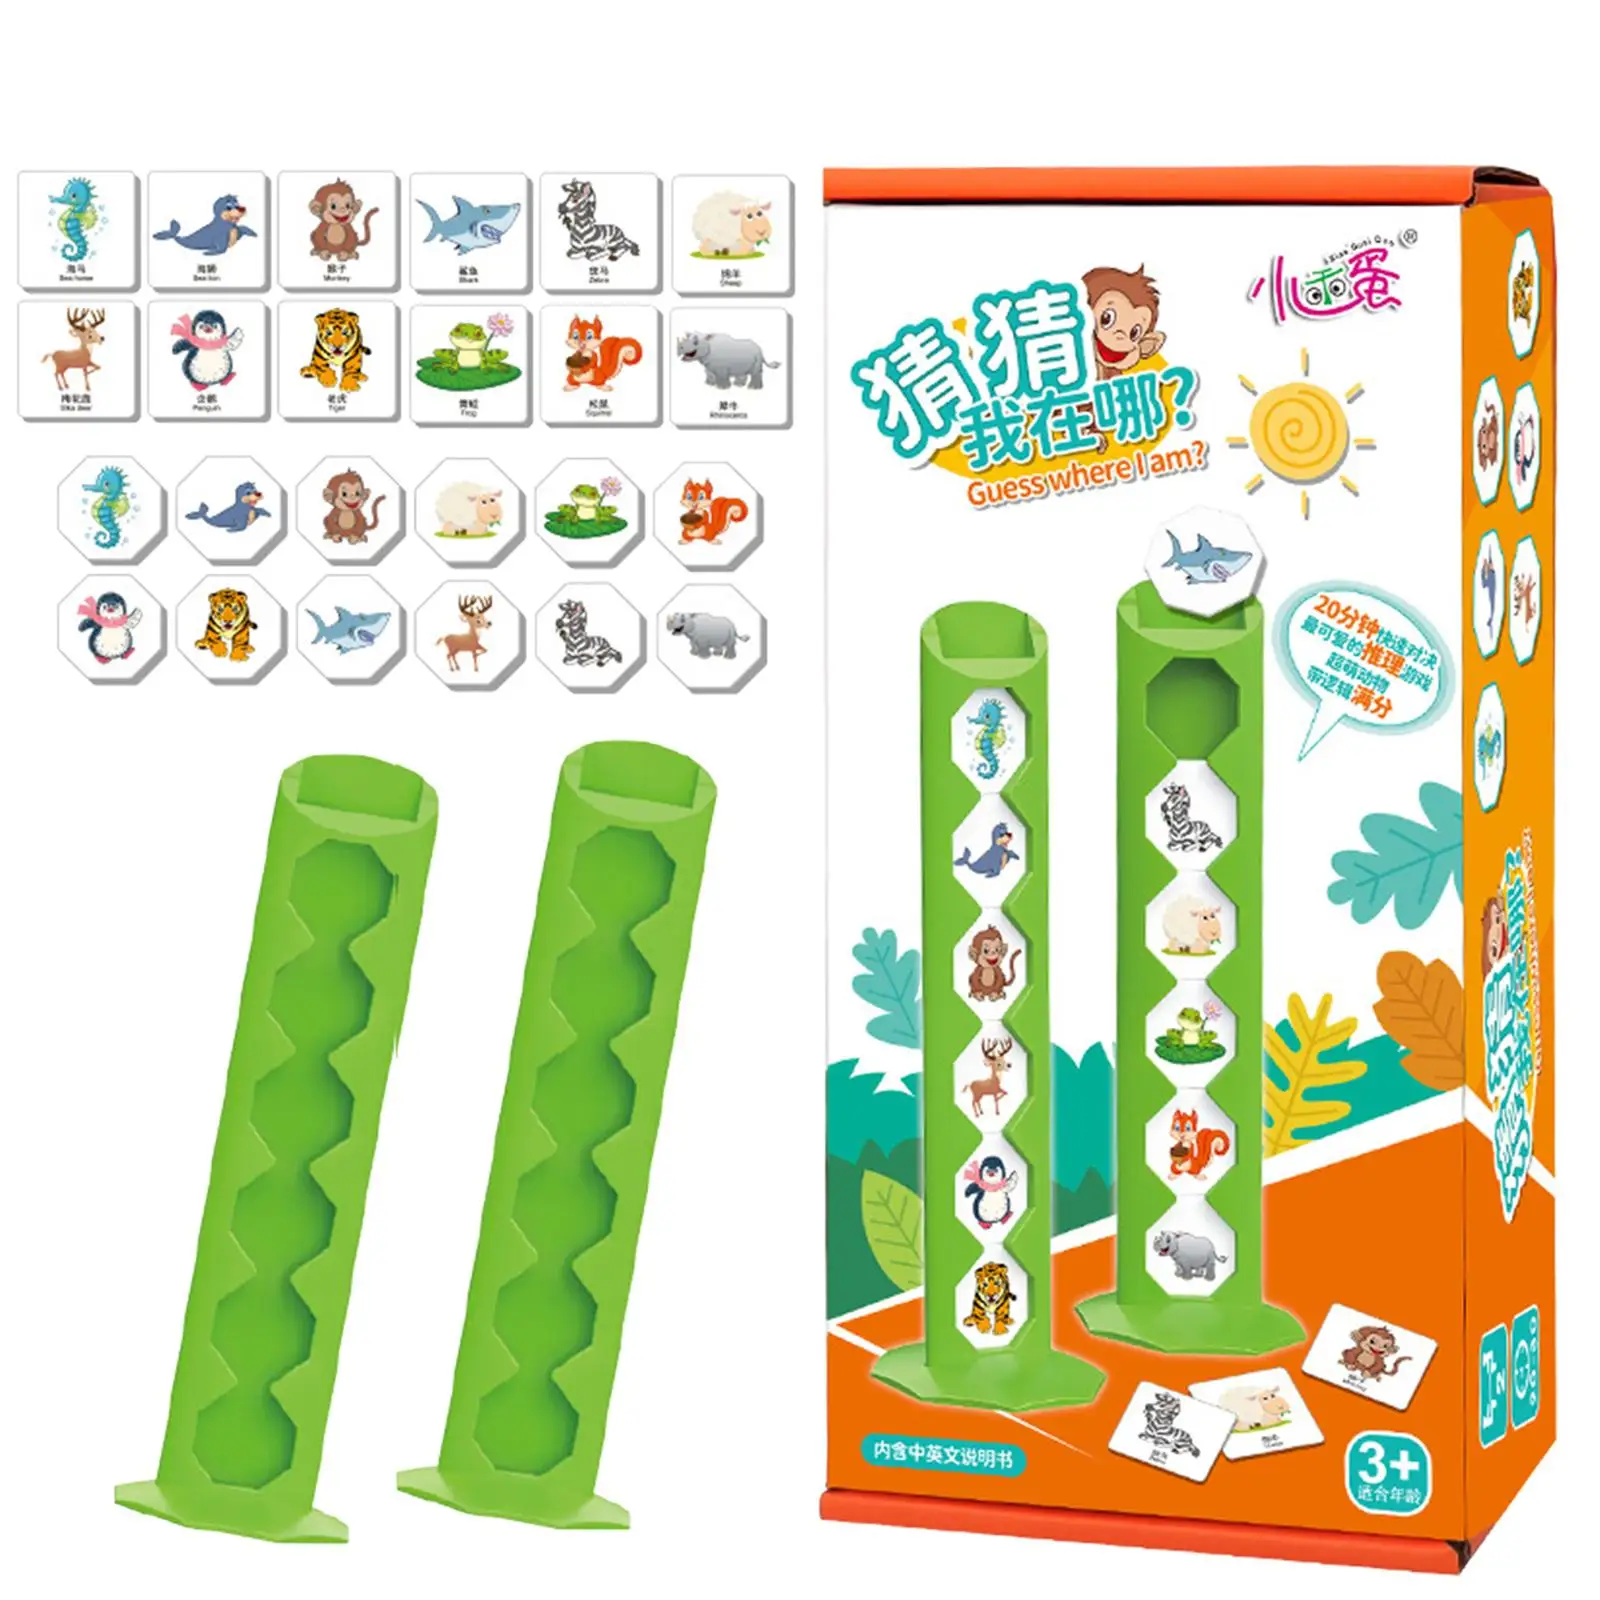 Guessing Game for Kids Detective Character Card for Family Game Gifts Girls